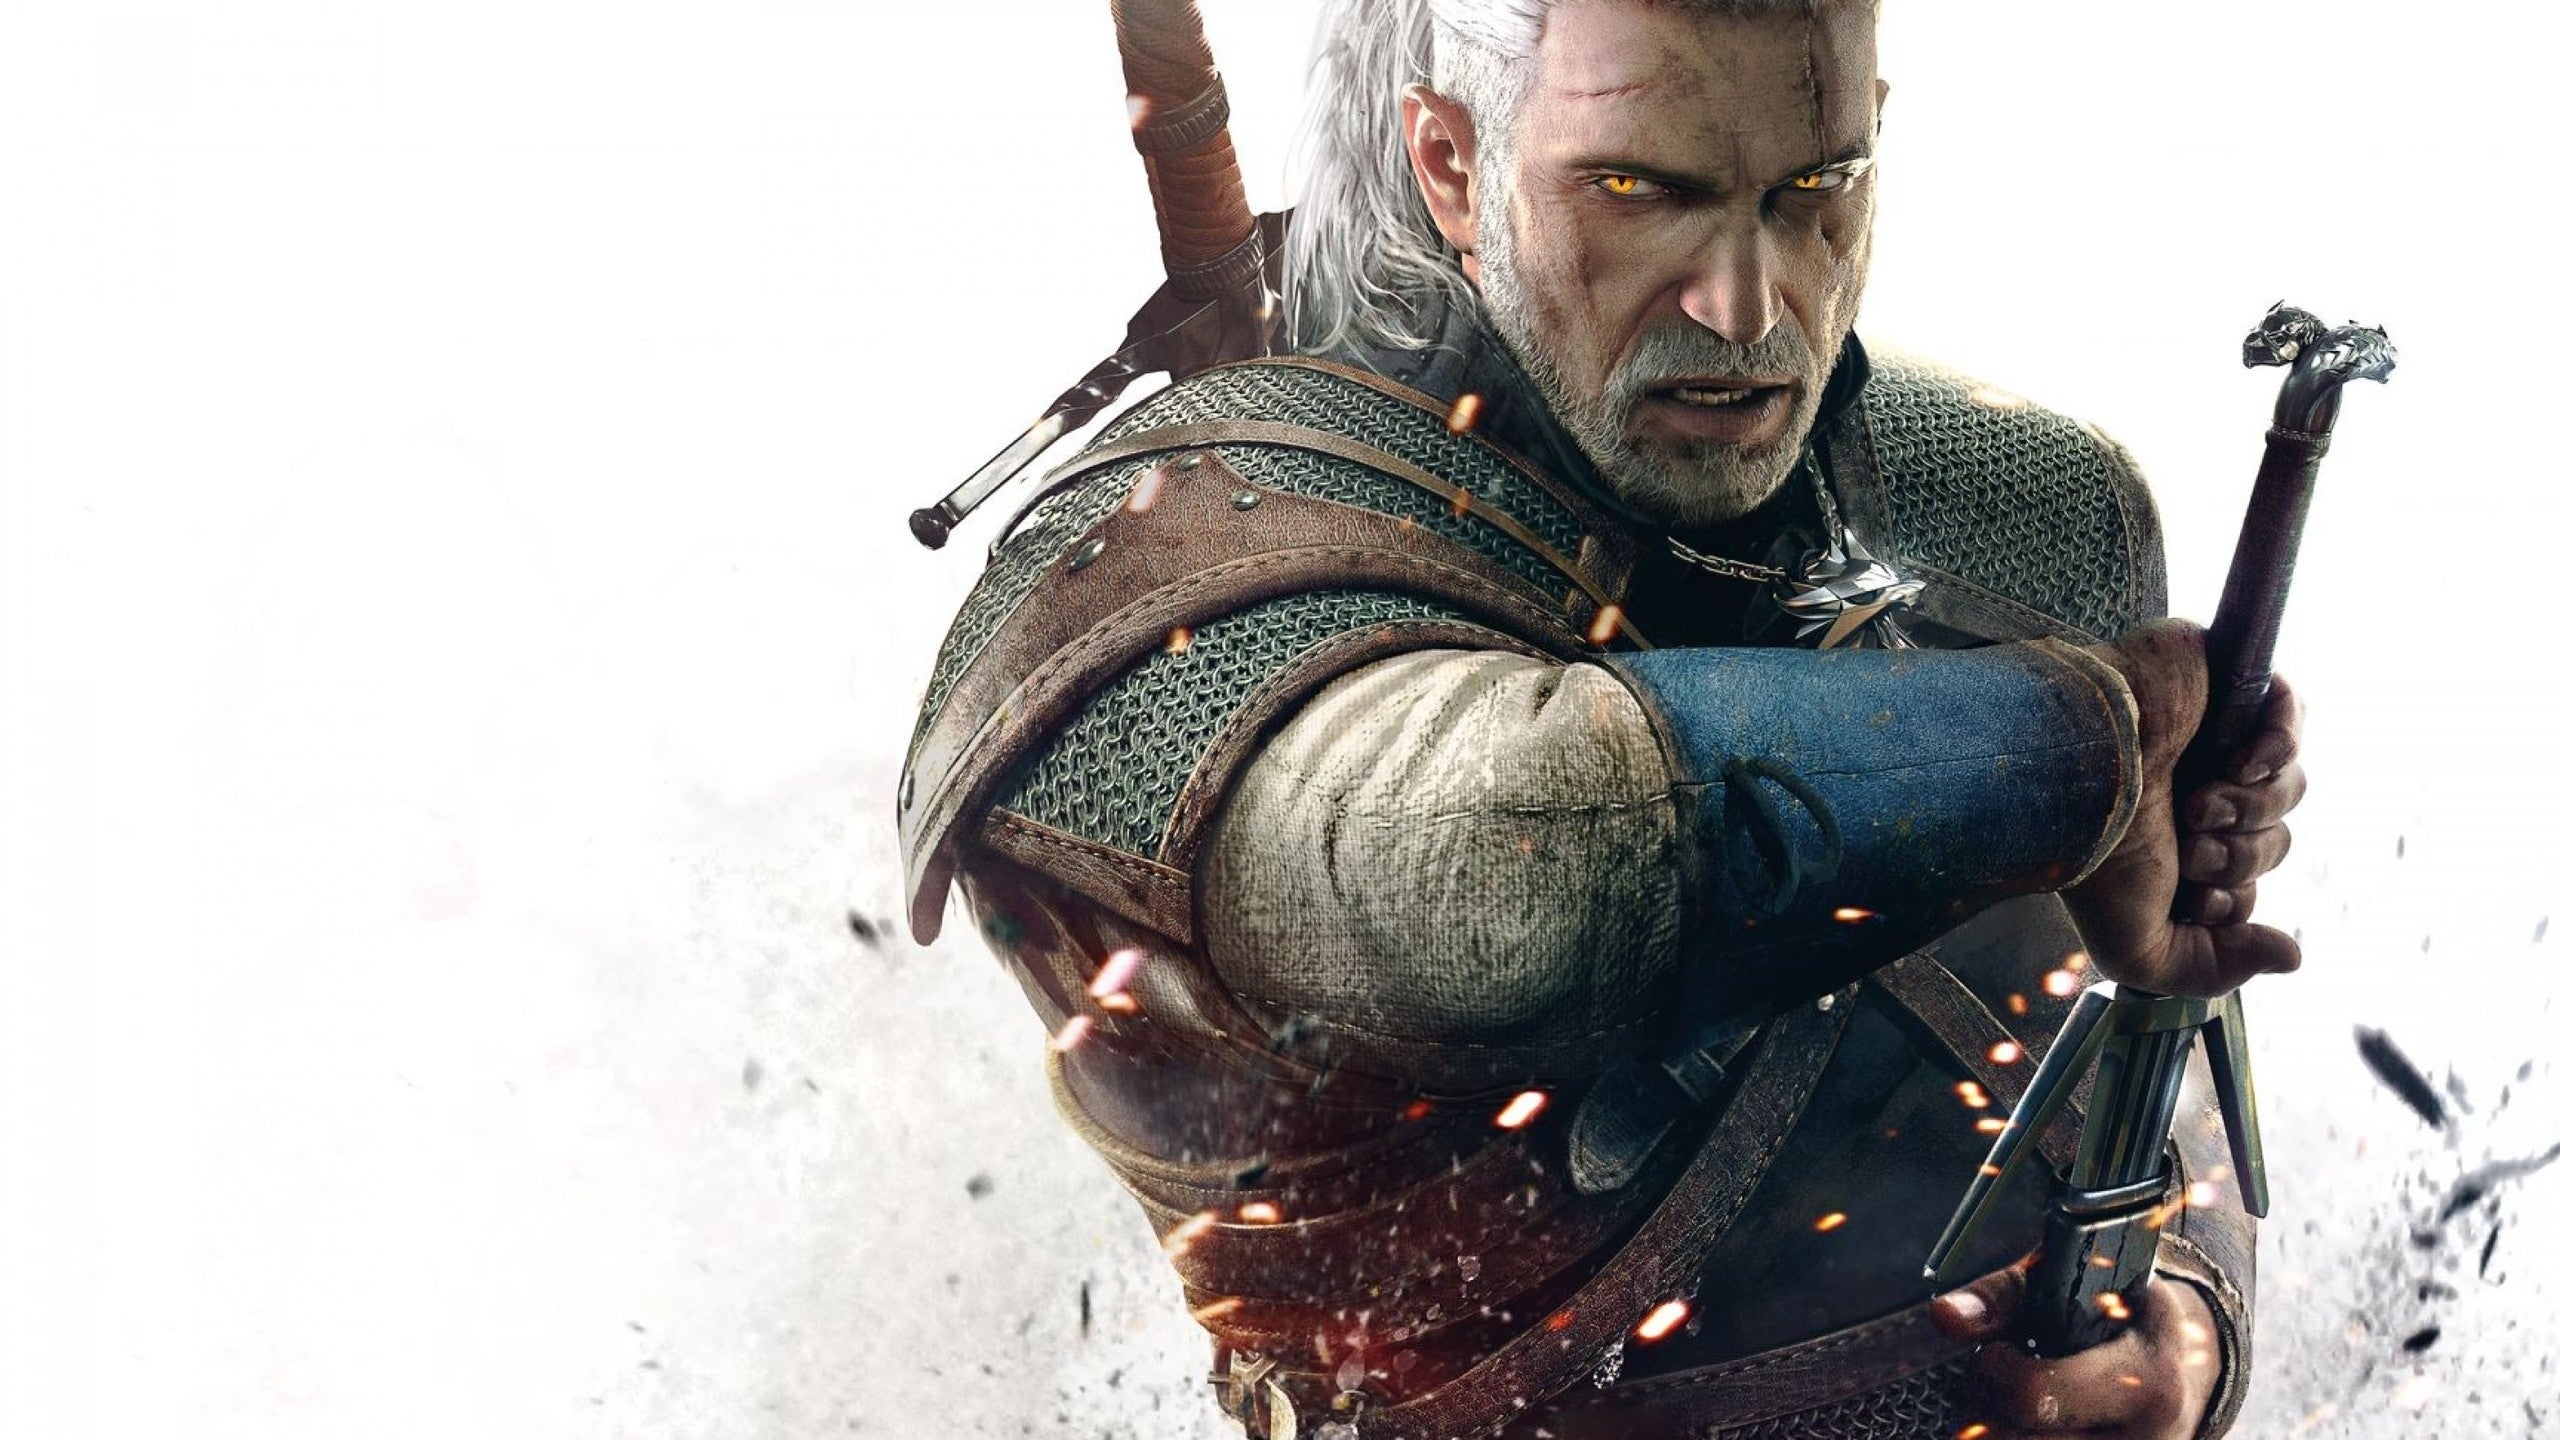 Image for The Witcher 3 next-gen upgrade definitely isn't in "development hell" insists CD Projekt senior vice president